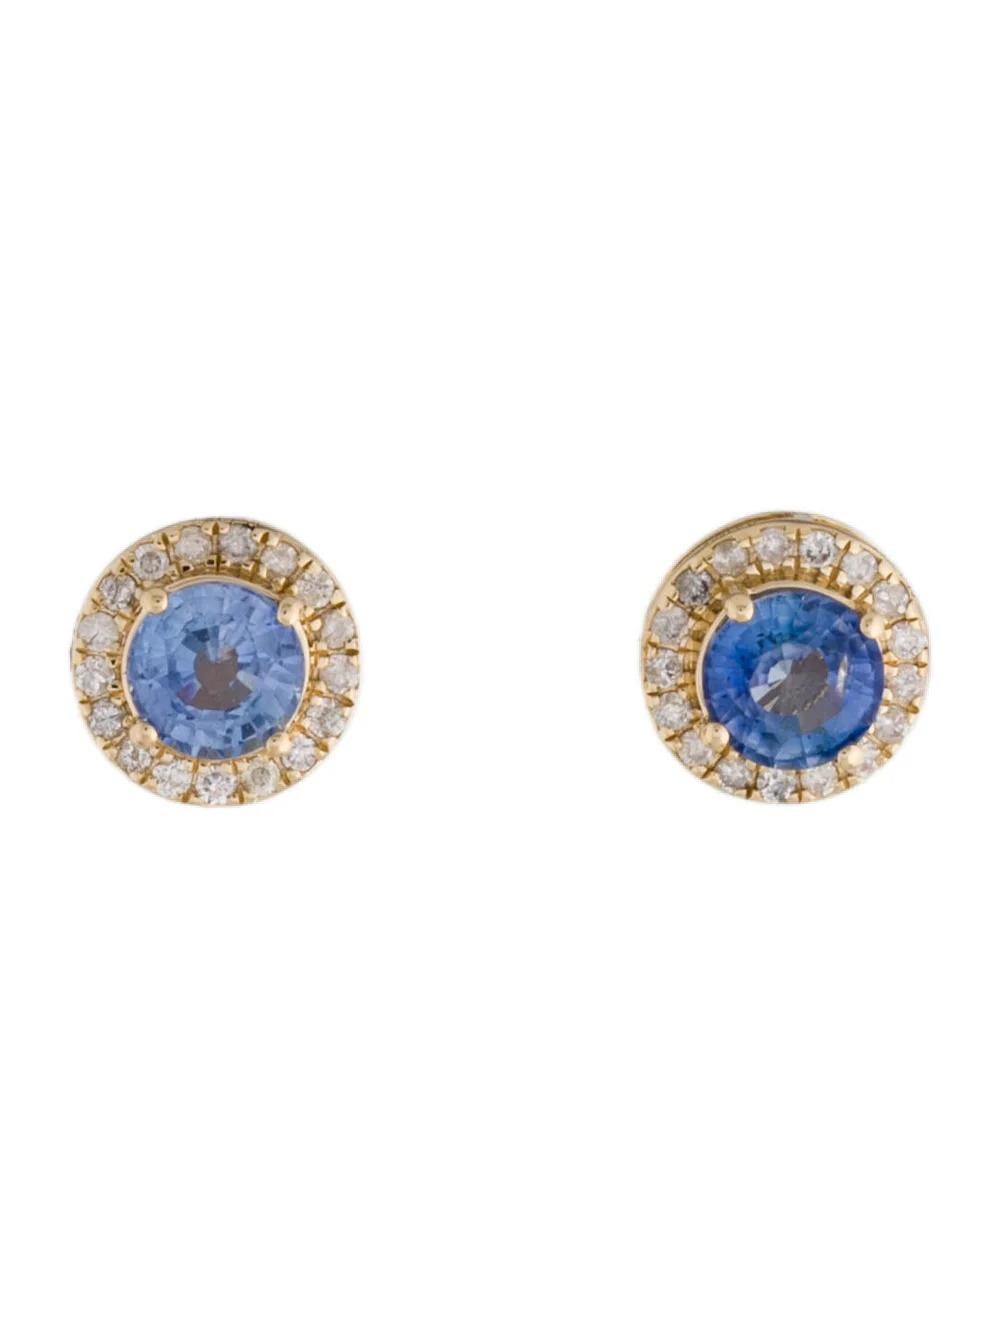 Elevate your elegance with these exquisite 14K Yellow Gold Sapphire & Diamond Stud Earrings. Crafted to perfection, each earring features a dazzling 1.24 Carat Round Brilliant Sapphire, accented by a halo of 34 sparkling Round Brilliant Diamonds